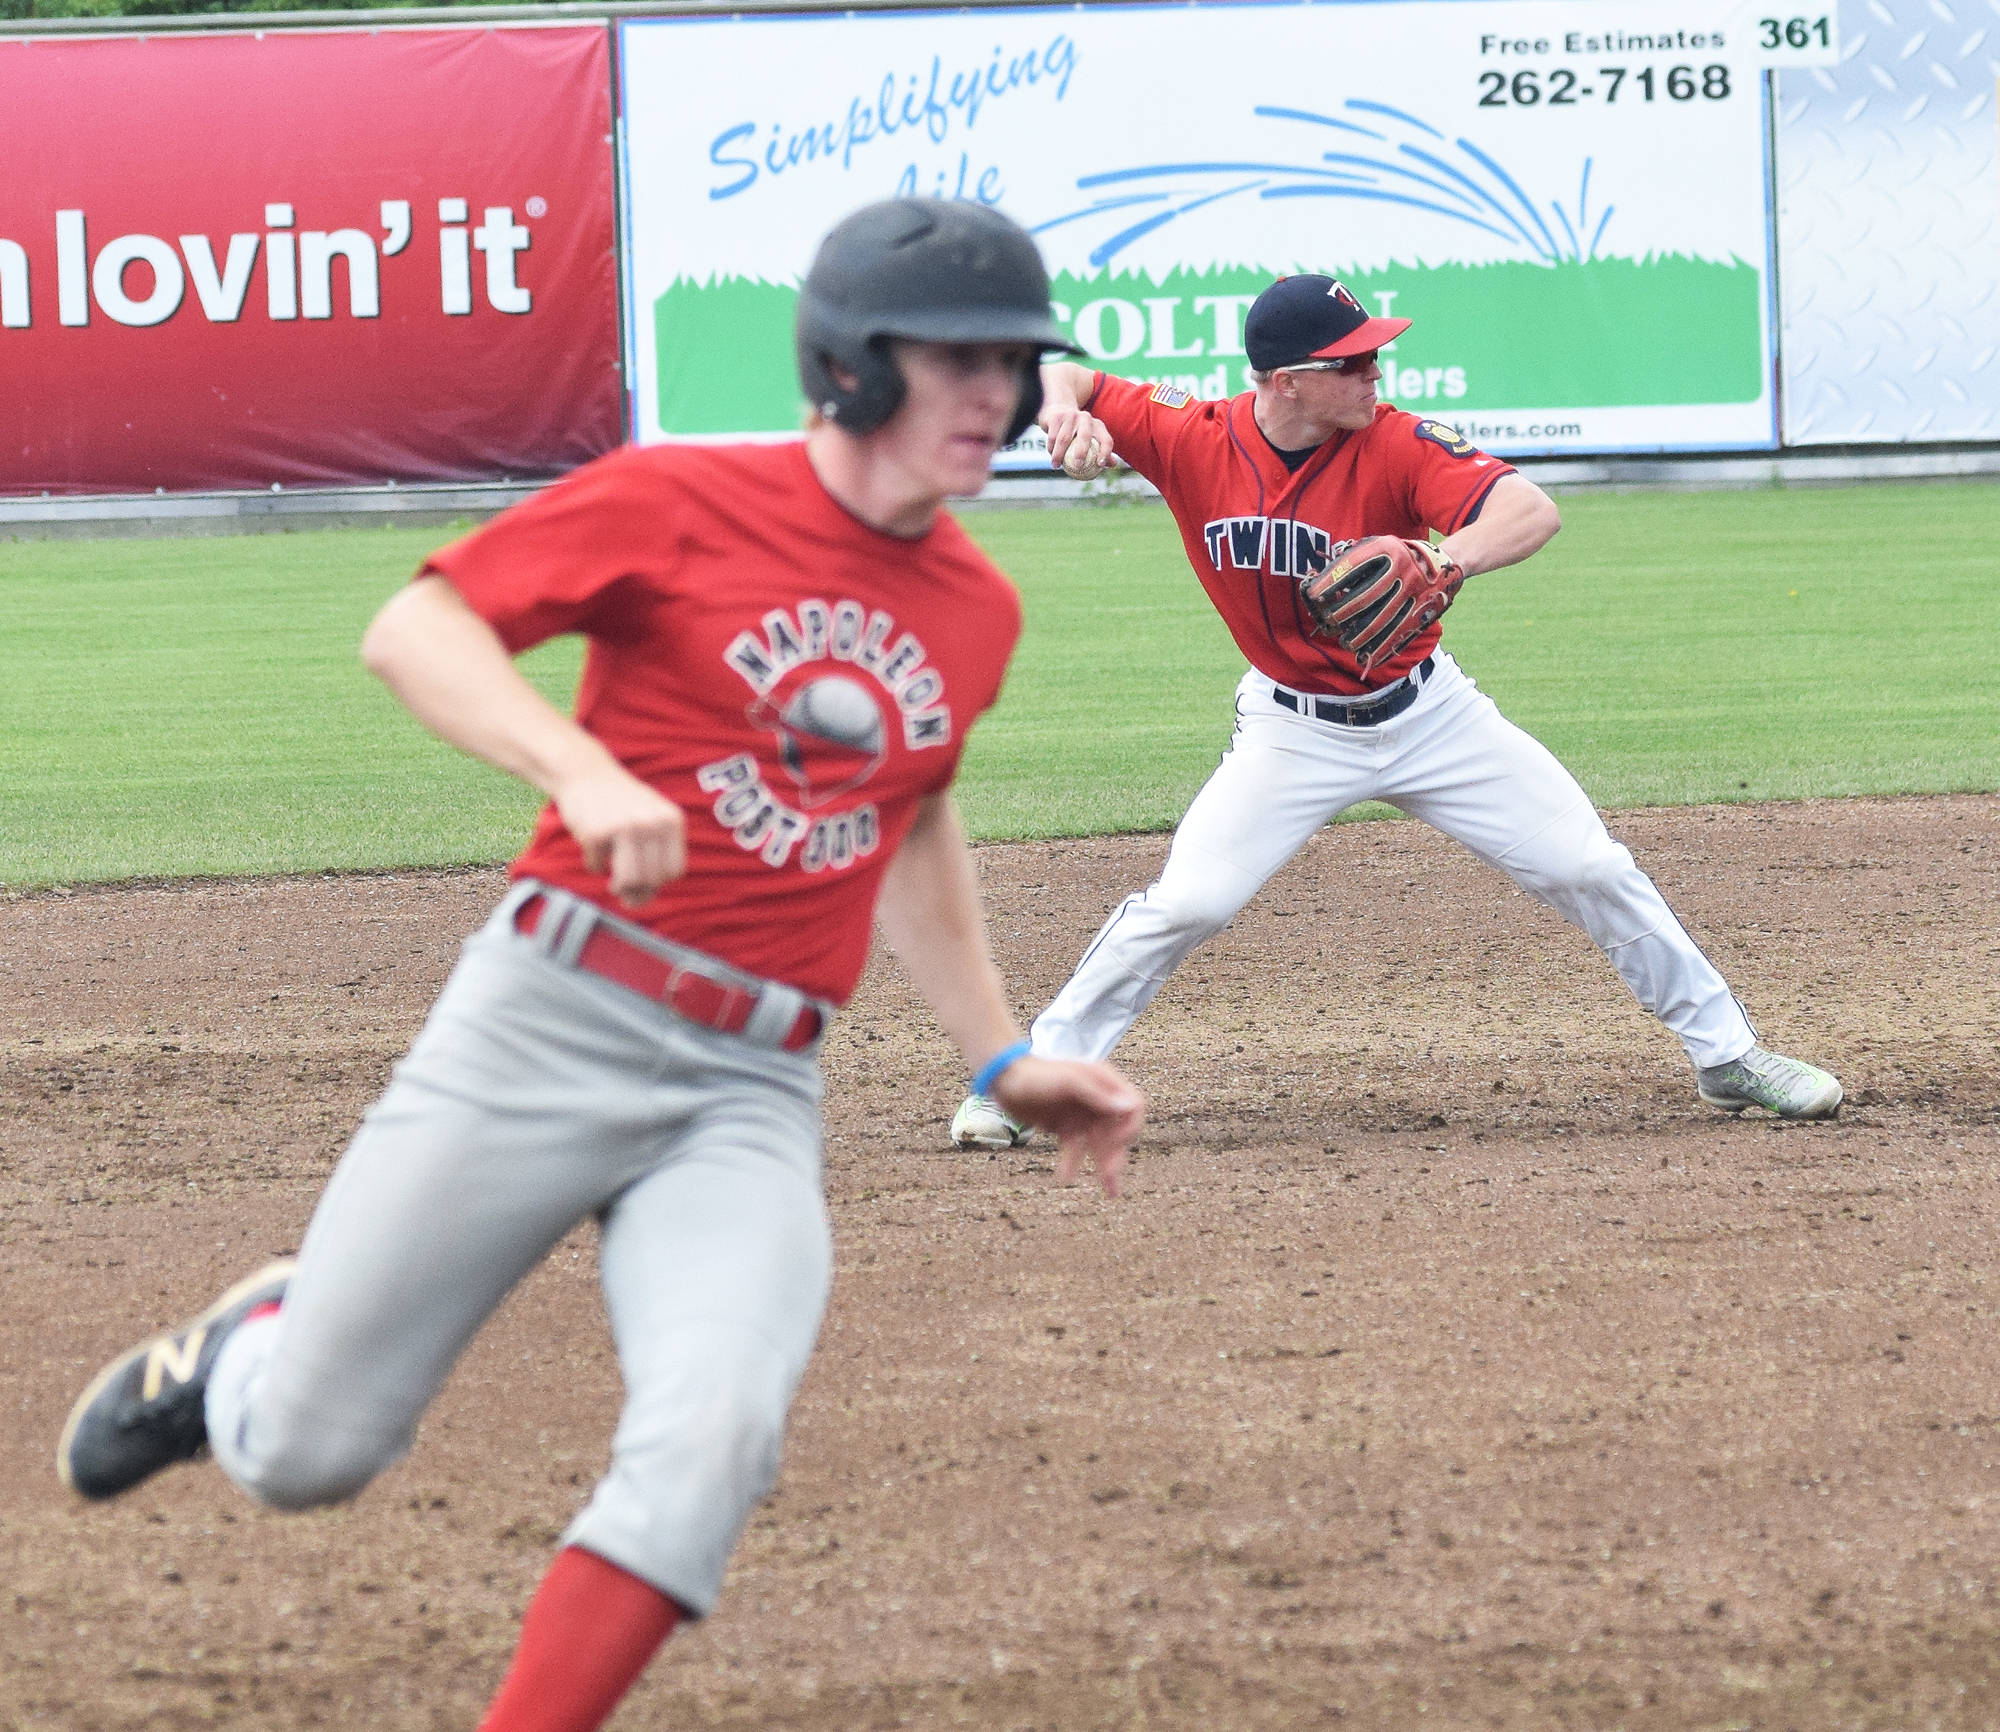 Post 20 Twins shortstop Paul Steffensen scoops up a groundball and throws to first on a play against the Napoleon, Ohio, River Bandits Wednesday at the Bill Miller Wood Bat Tournament at Coral Seymour Memorial Ballpark in Kenai. (Photo by Joey Klecka/Peninsula Clarion)